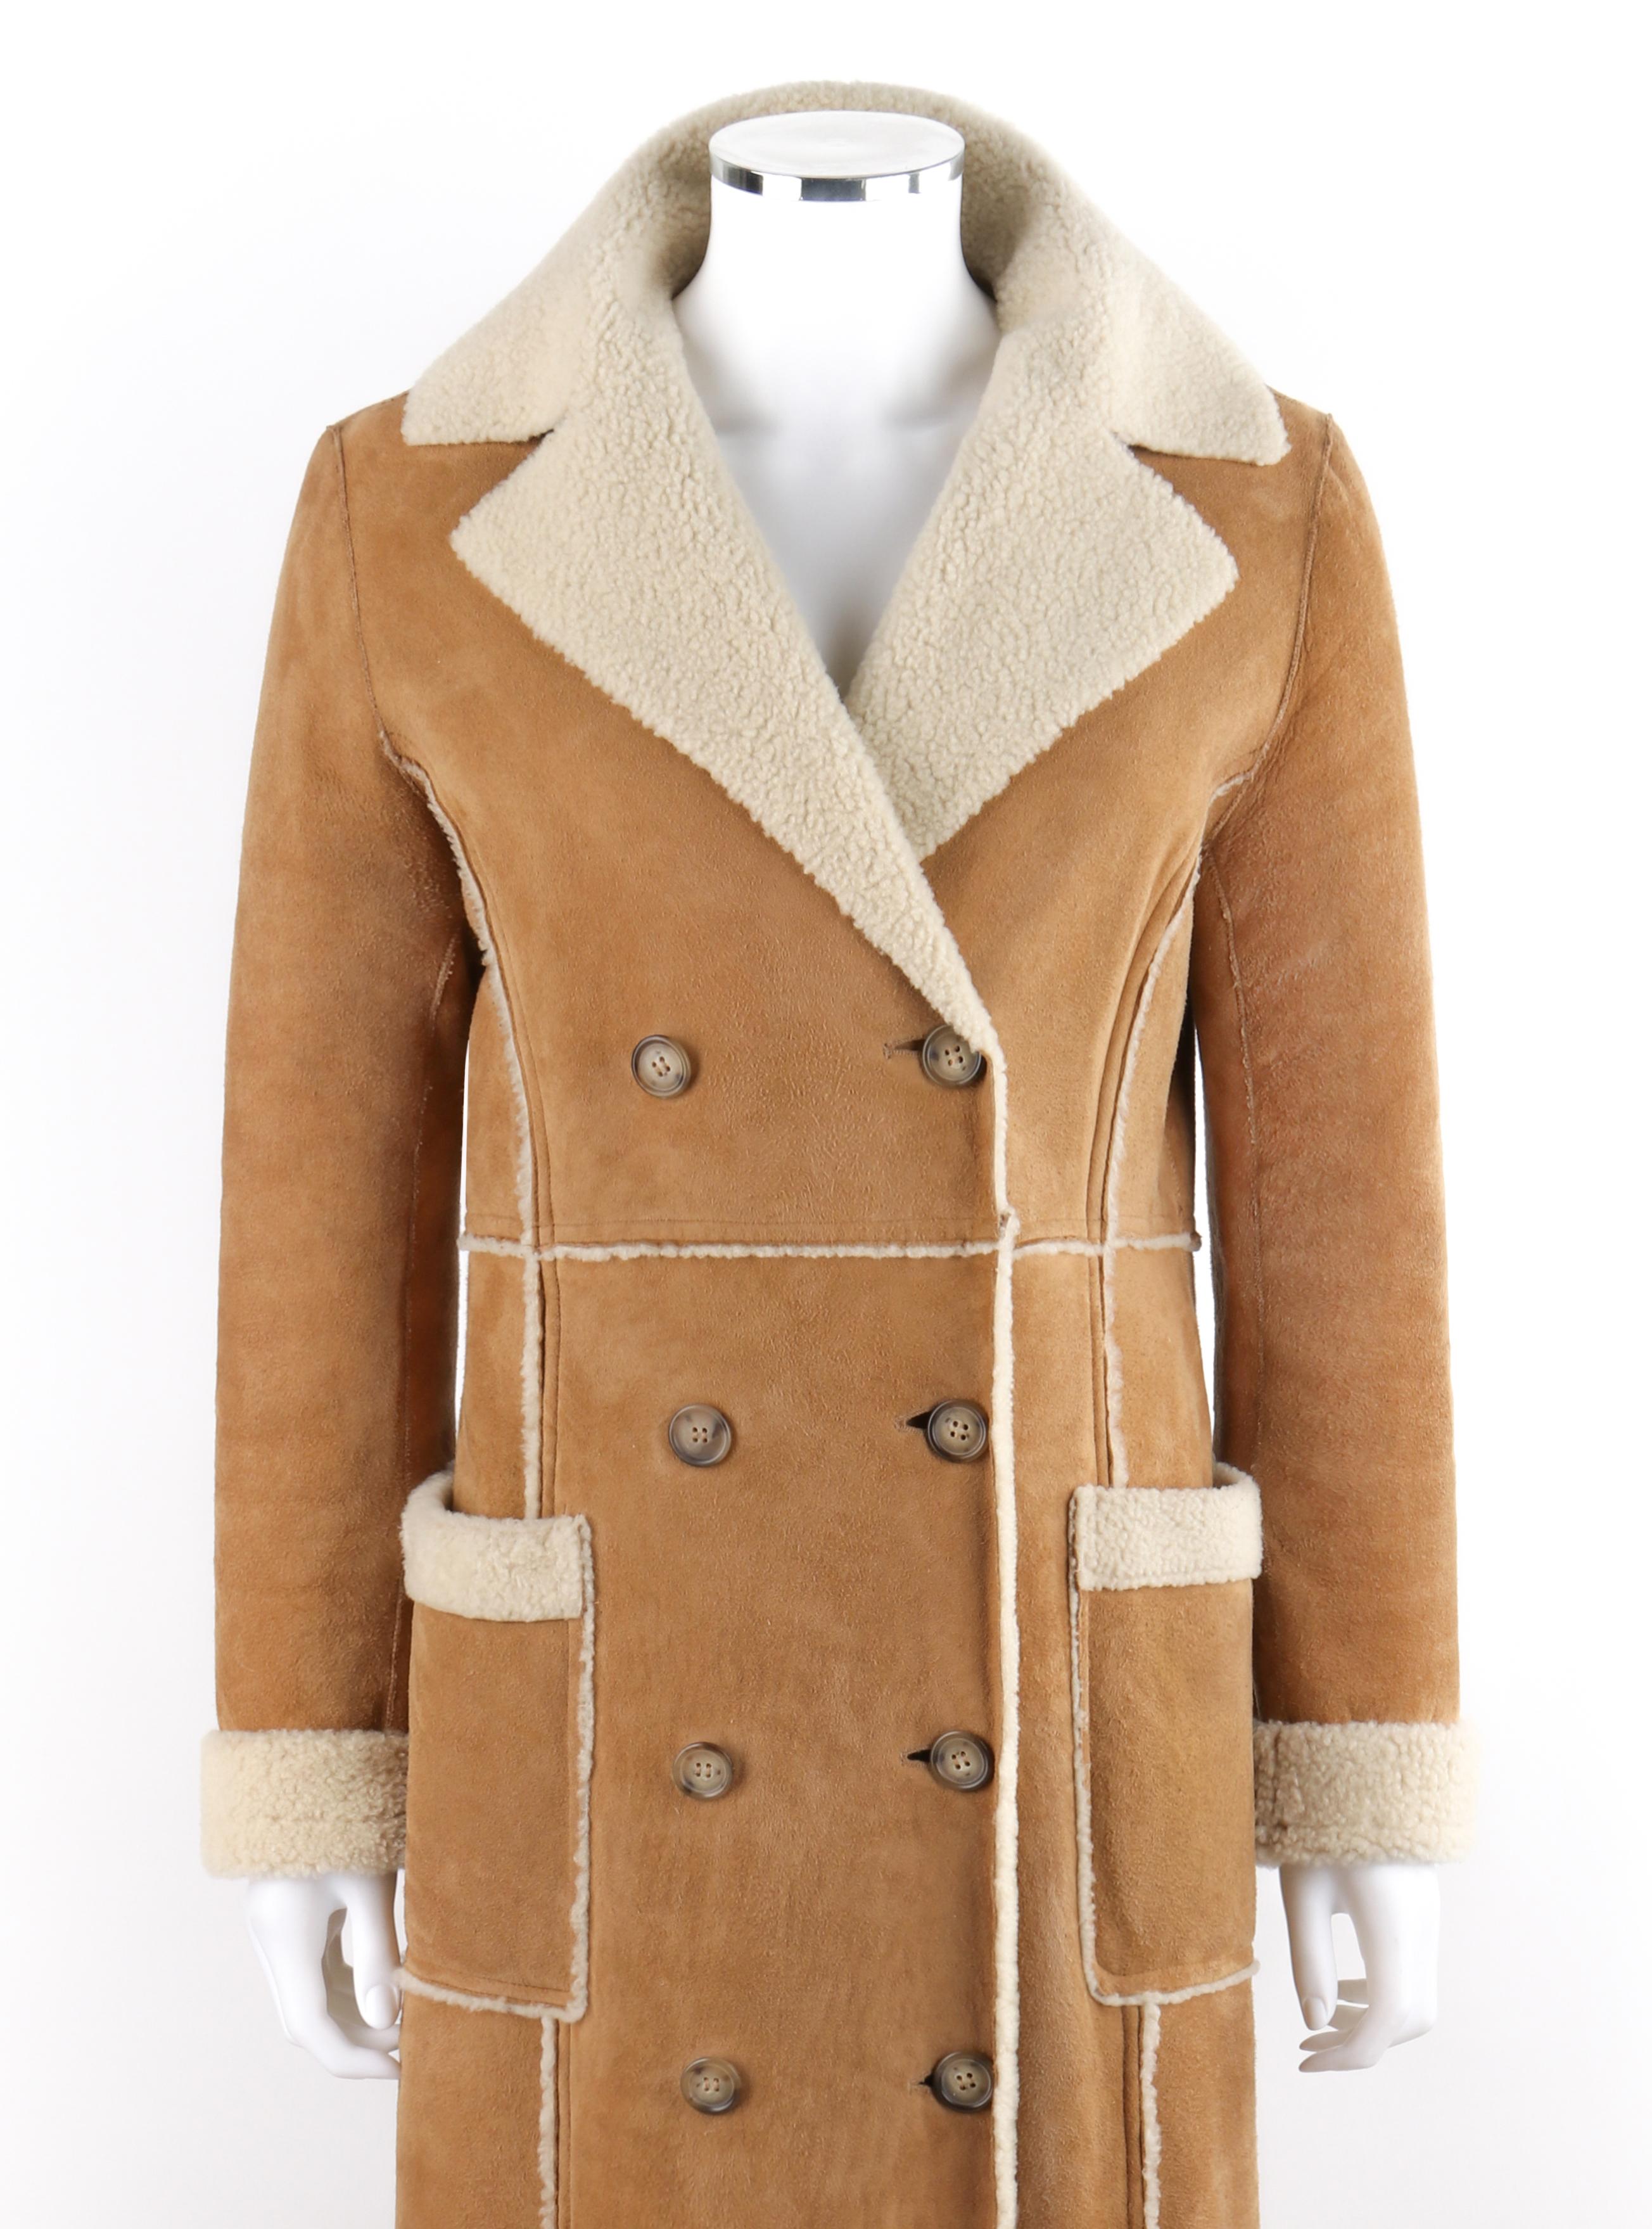 Vintage: KORS by MICHAEL KORS Tan Suede Shearling Fur Double Breasted Long Overcoat

Brand / Manufacturer: Michael Kors
Collection: Kors by Michael Kors
Designer: Michael Kors
Style: Full-length overcoat
Color(s): Shades of tan and off white 
Lined: